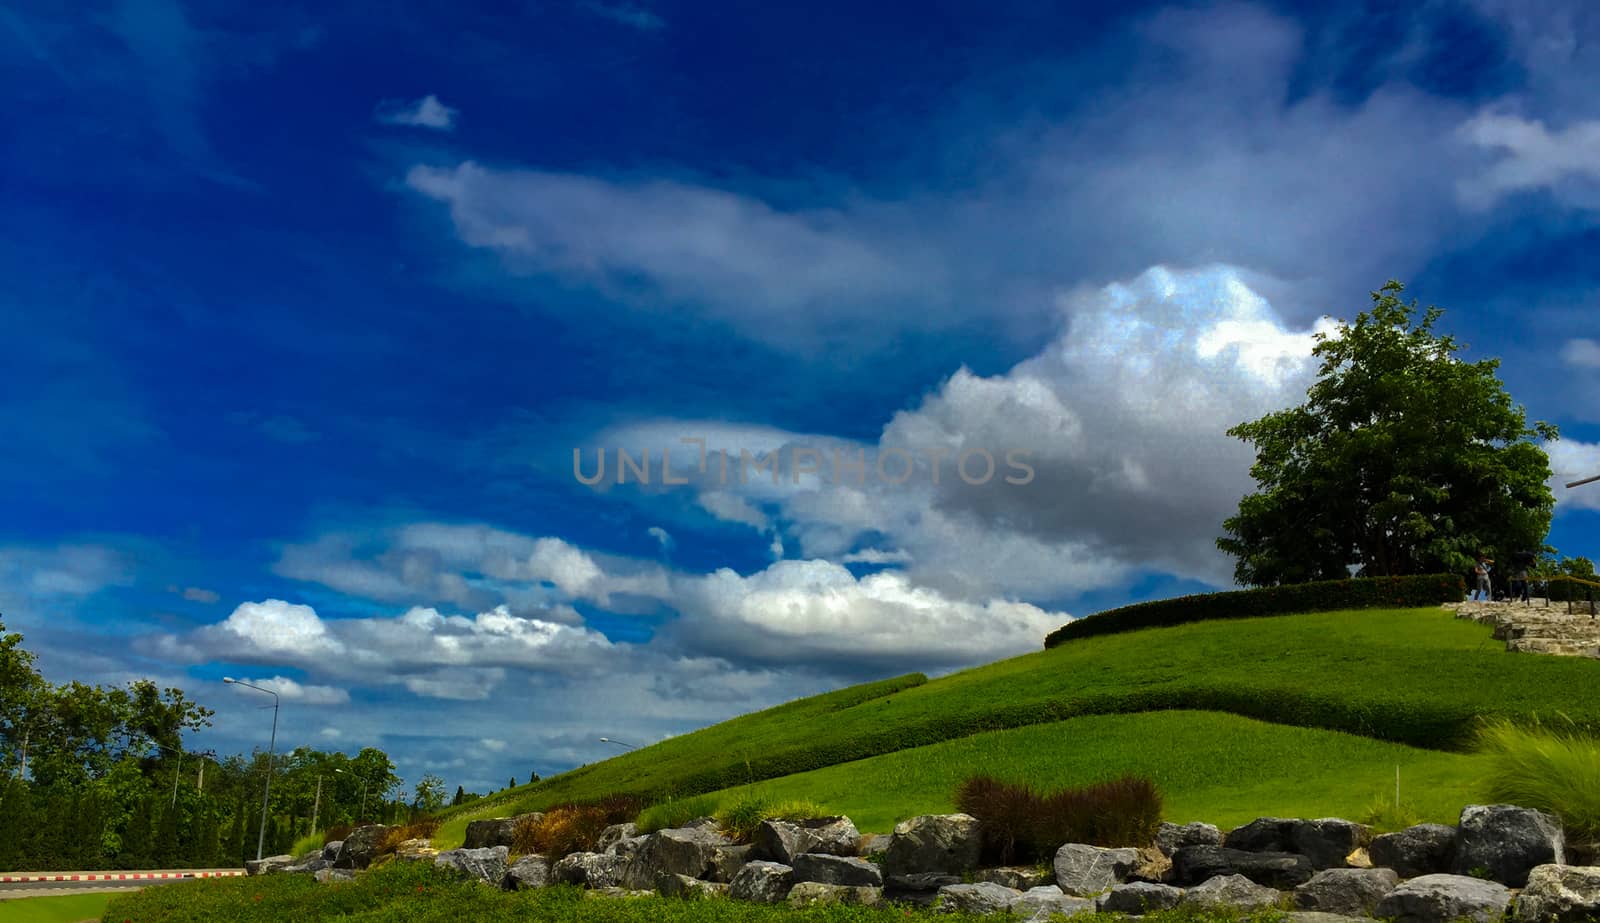 A beautiful landscape green tree and green grass on the hills, Cloud, Blue sky, fresh, bright, vivid. Summer, trees, hill and blue sky. A green tree are standing on the top of a hill. There is a clear blue sky above and a big white cloud.